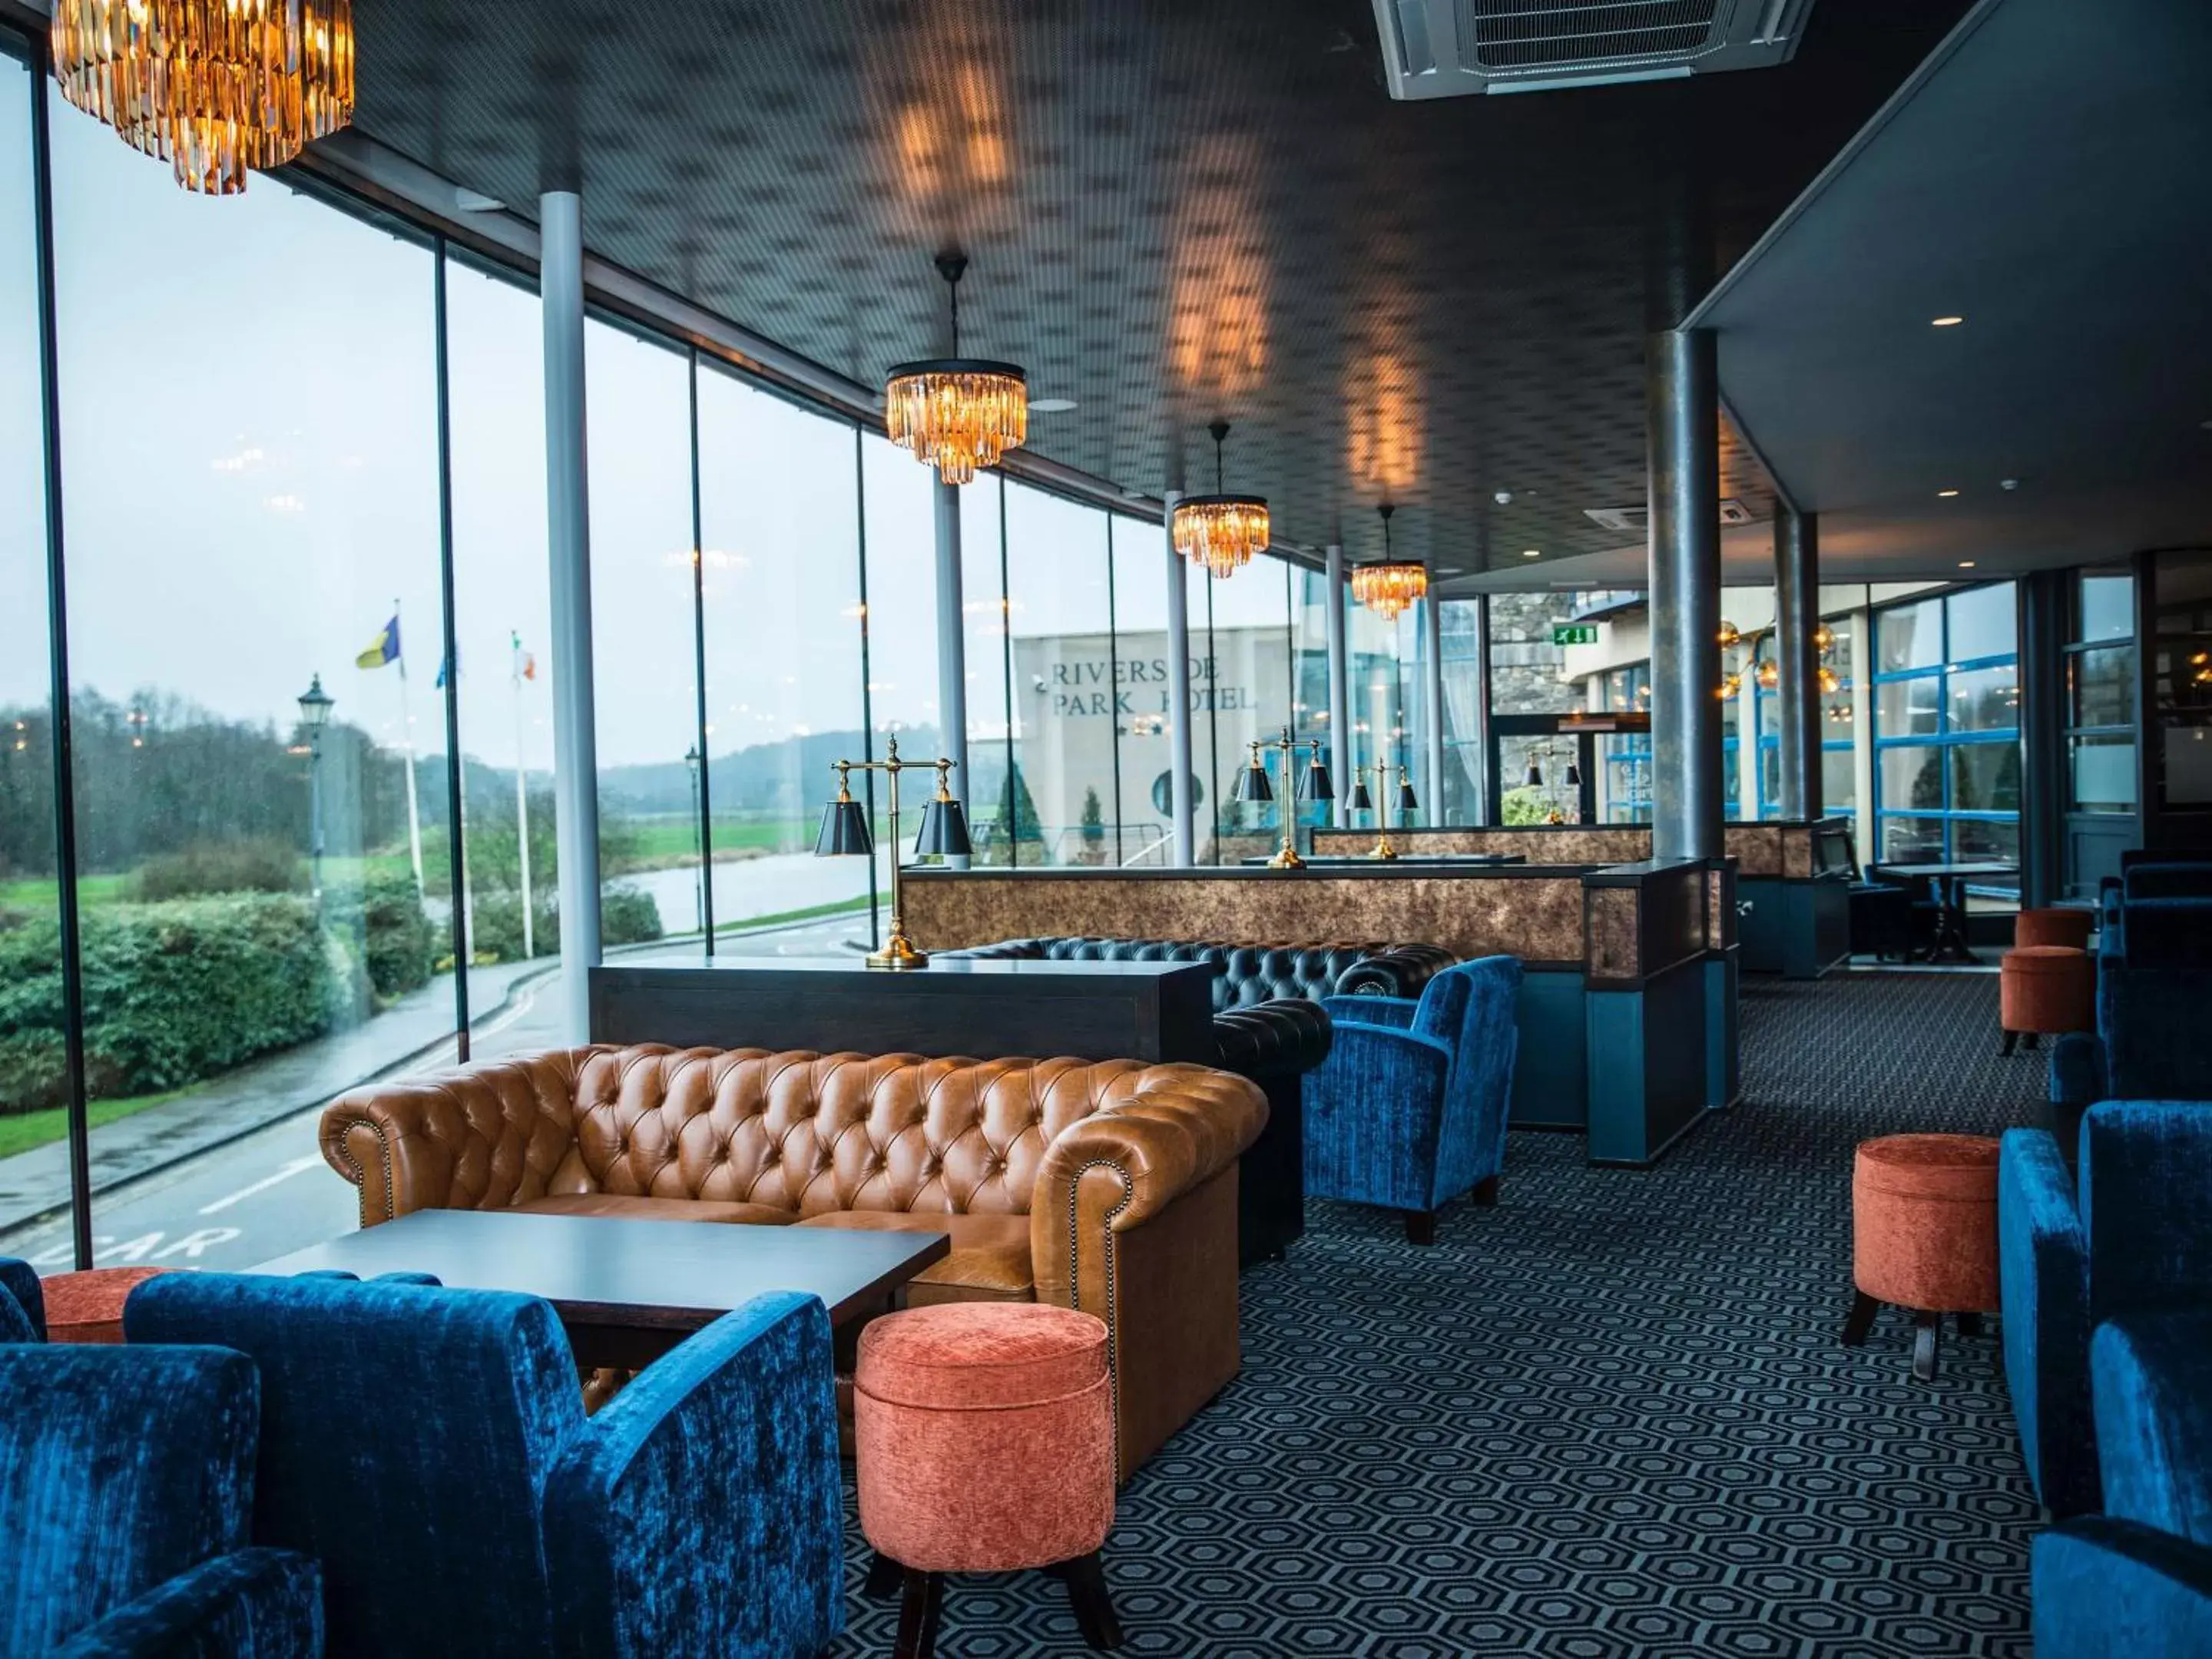 Lounge or bar in The Riverside Park Hotel